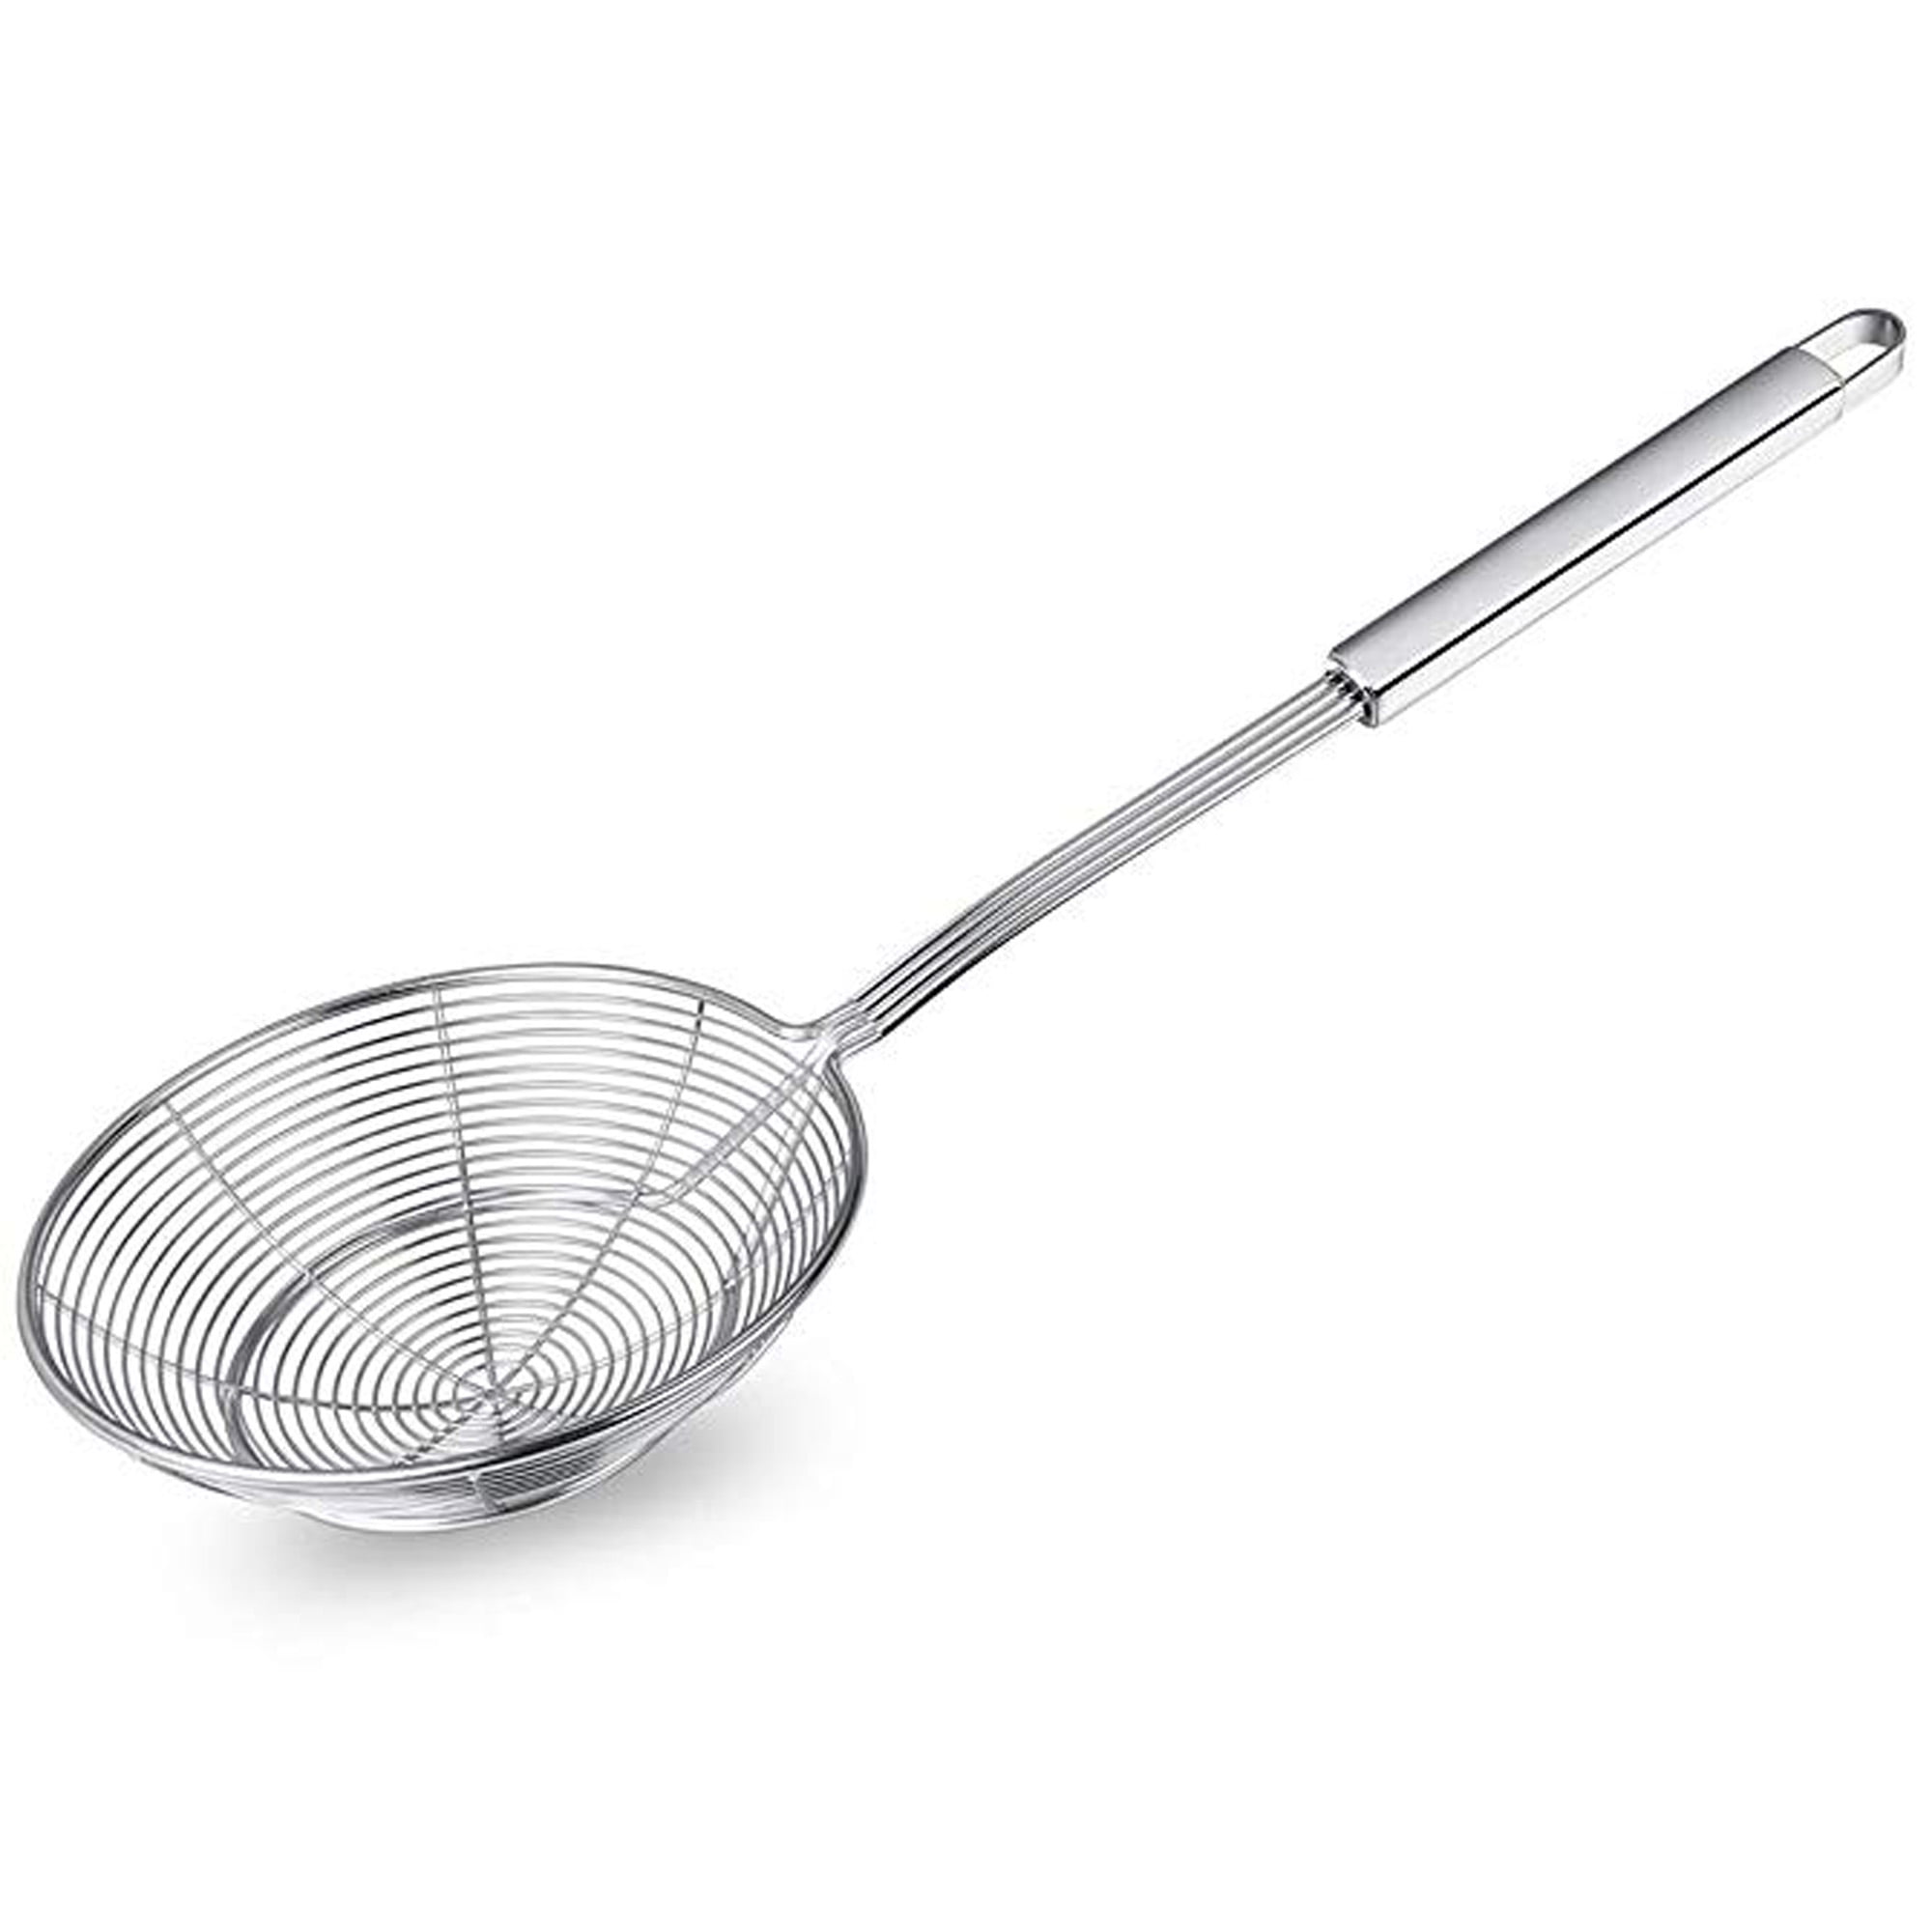 22cm Pasta CHDHALTD Frying Net Mesh Colander Strainer Basket with Handles Stainless Steel Wire Skimmer Spoon for Kitchen Frying Food Spaghetti Noodle 